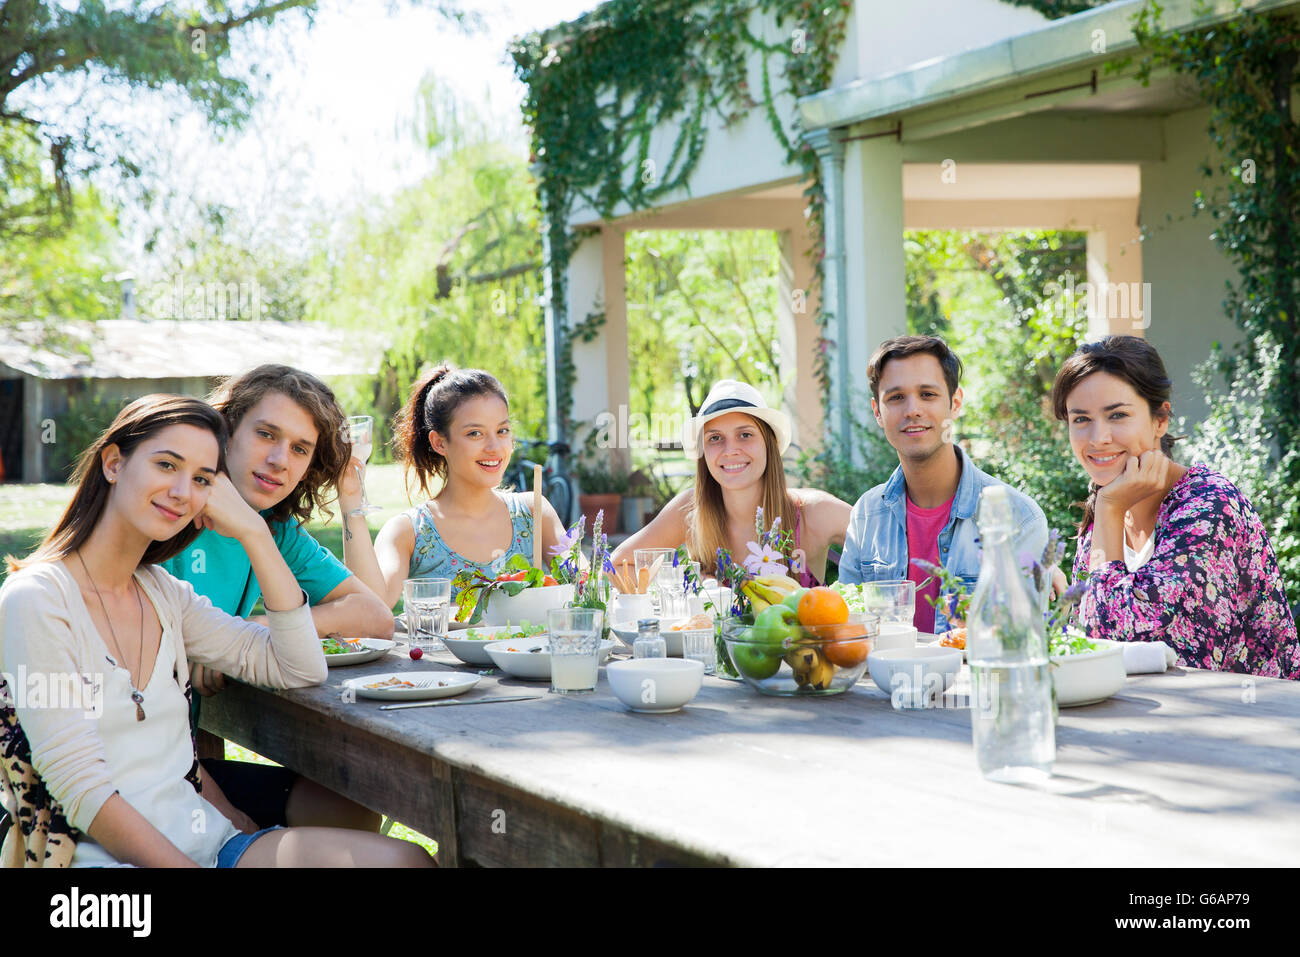 Friends having meal together, portrait Stock Photo